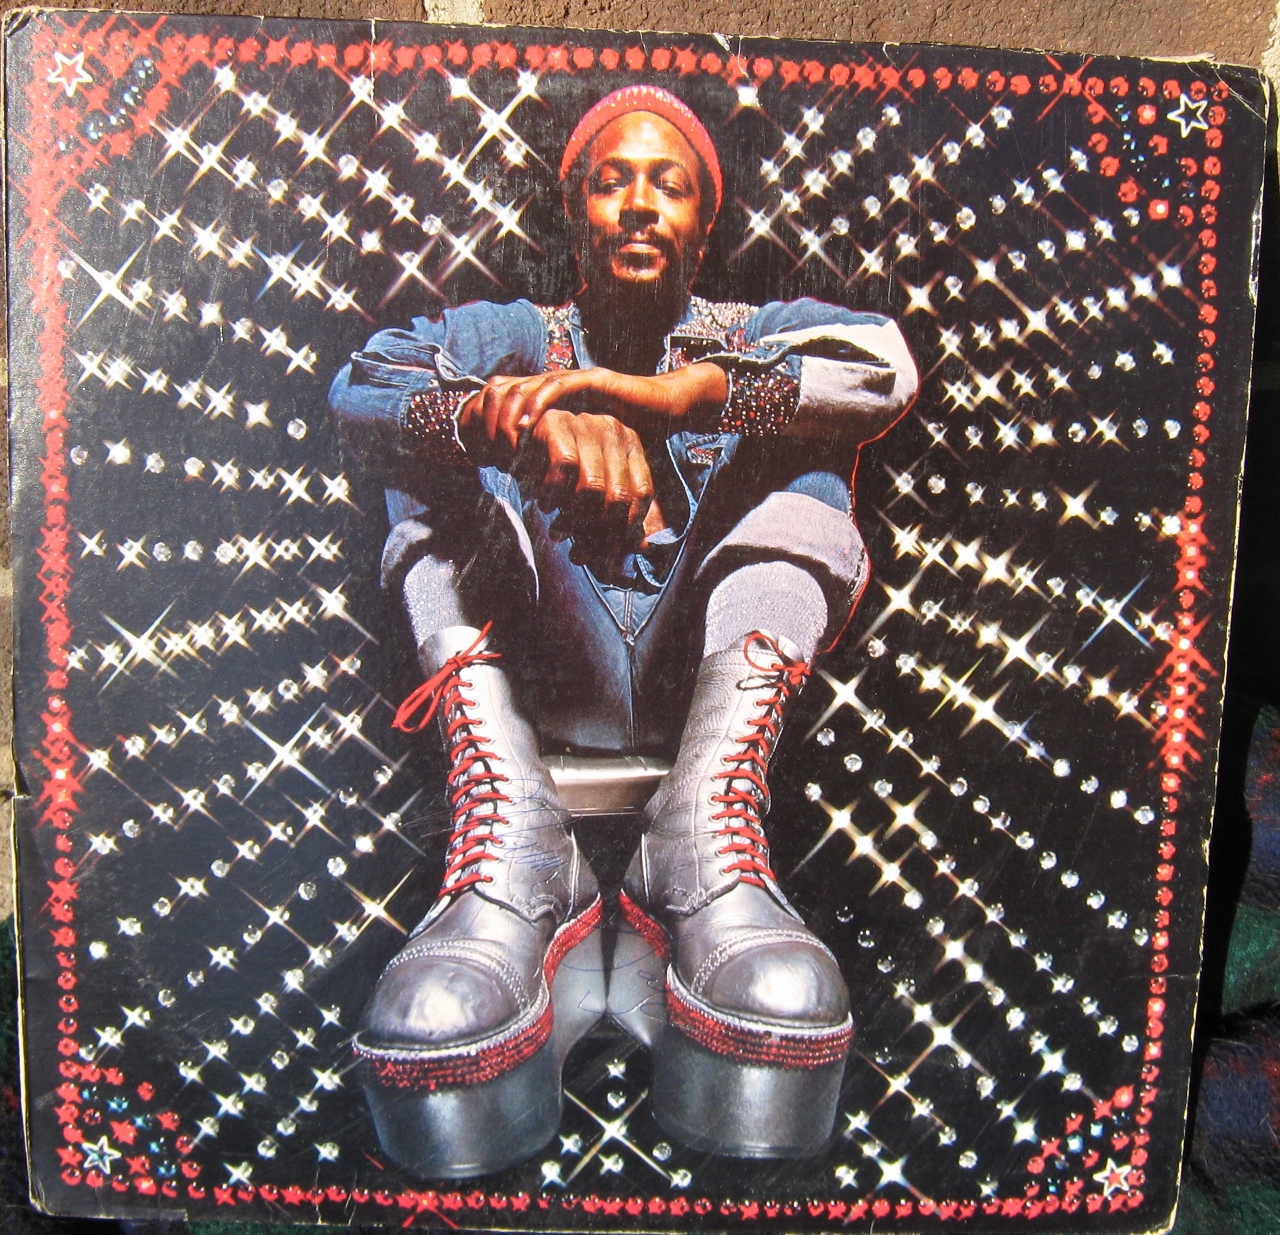 marvin-gaye-autograph-signed-marvin-gaye-live-lp-record-album-gatefold-photo-3.gif